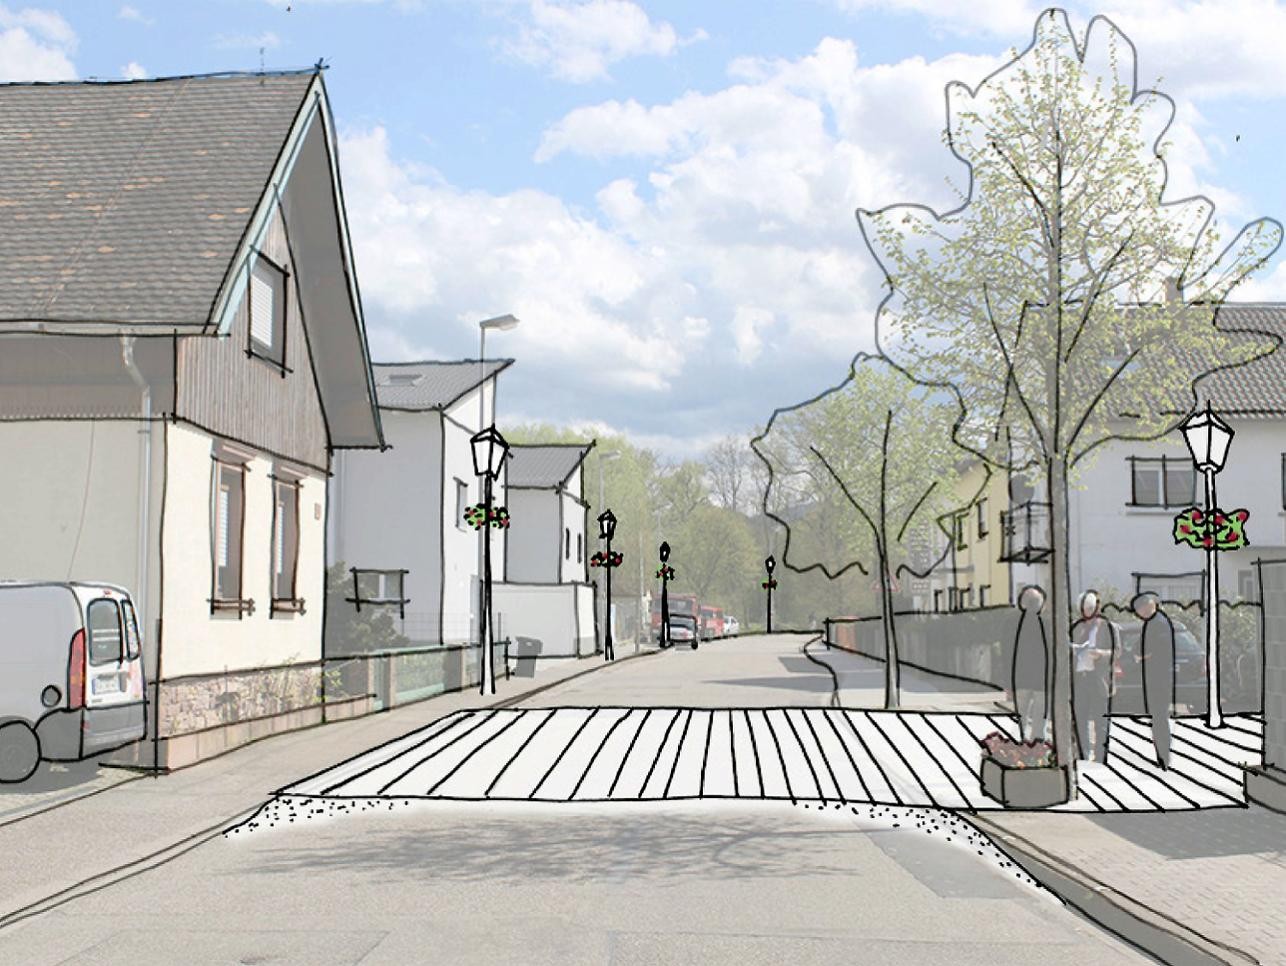 Drawing new Favoritestraße in Förch with houses a crosswalk and trees